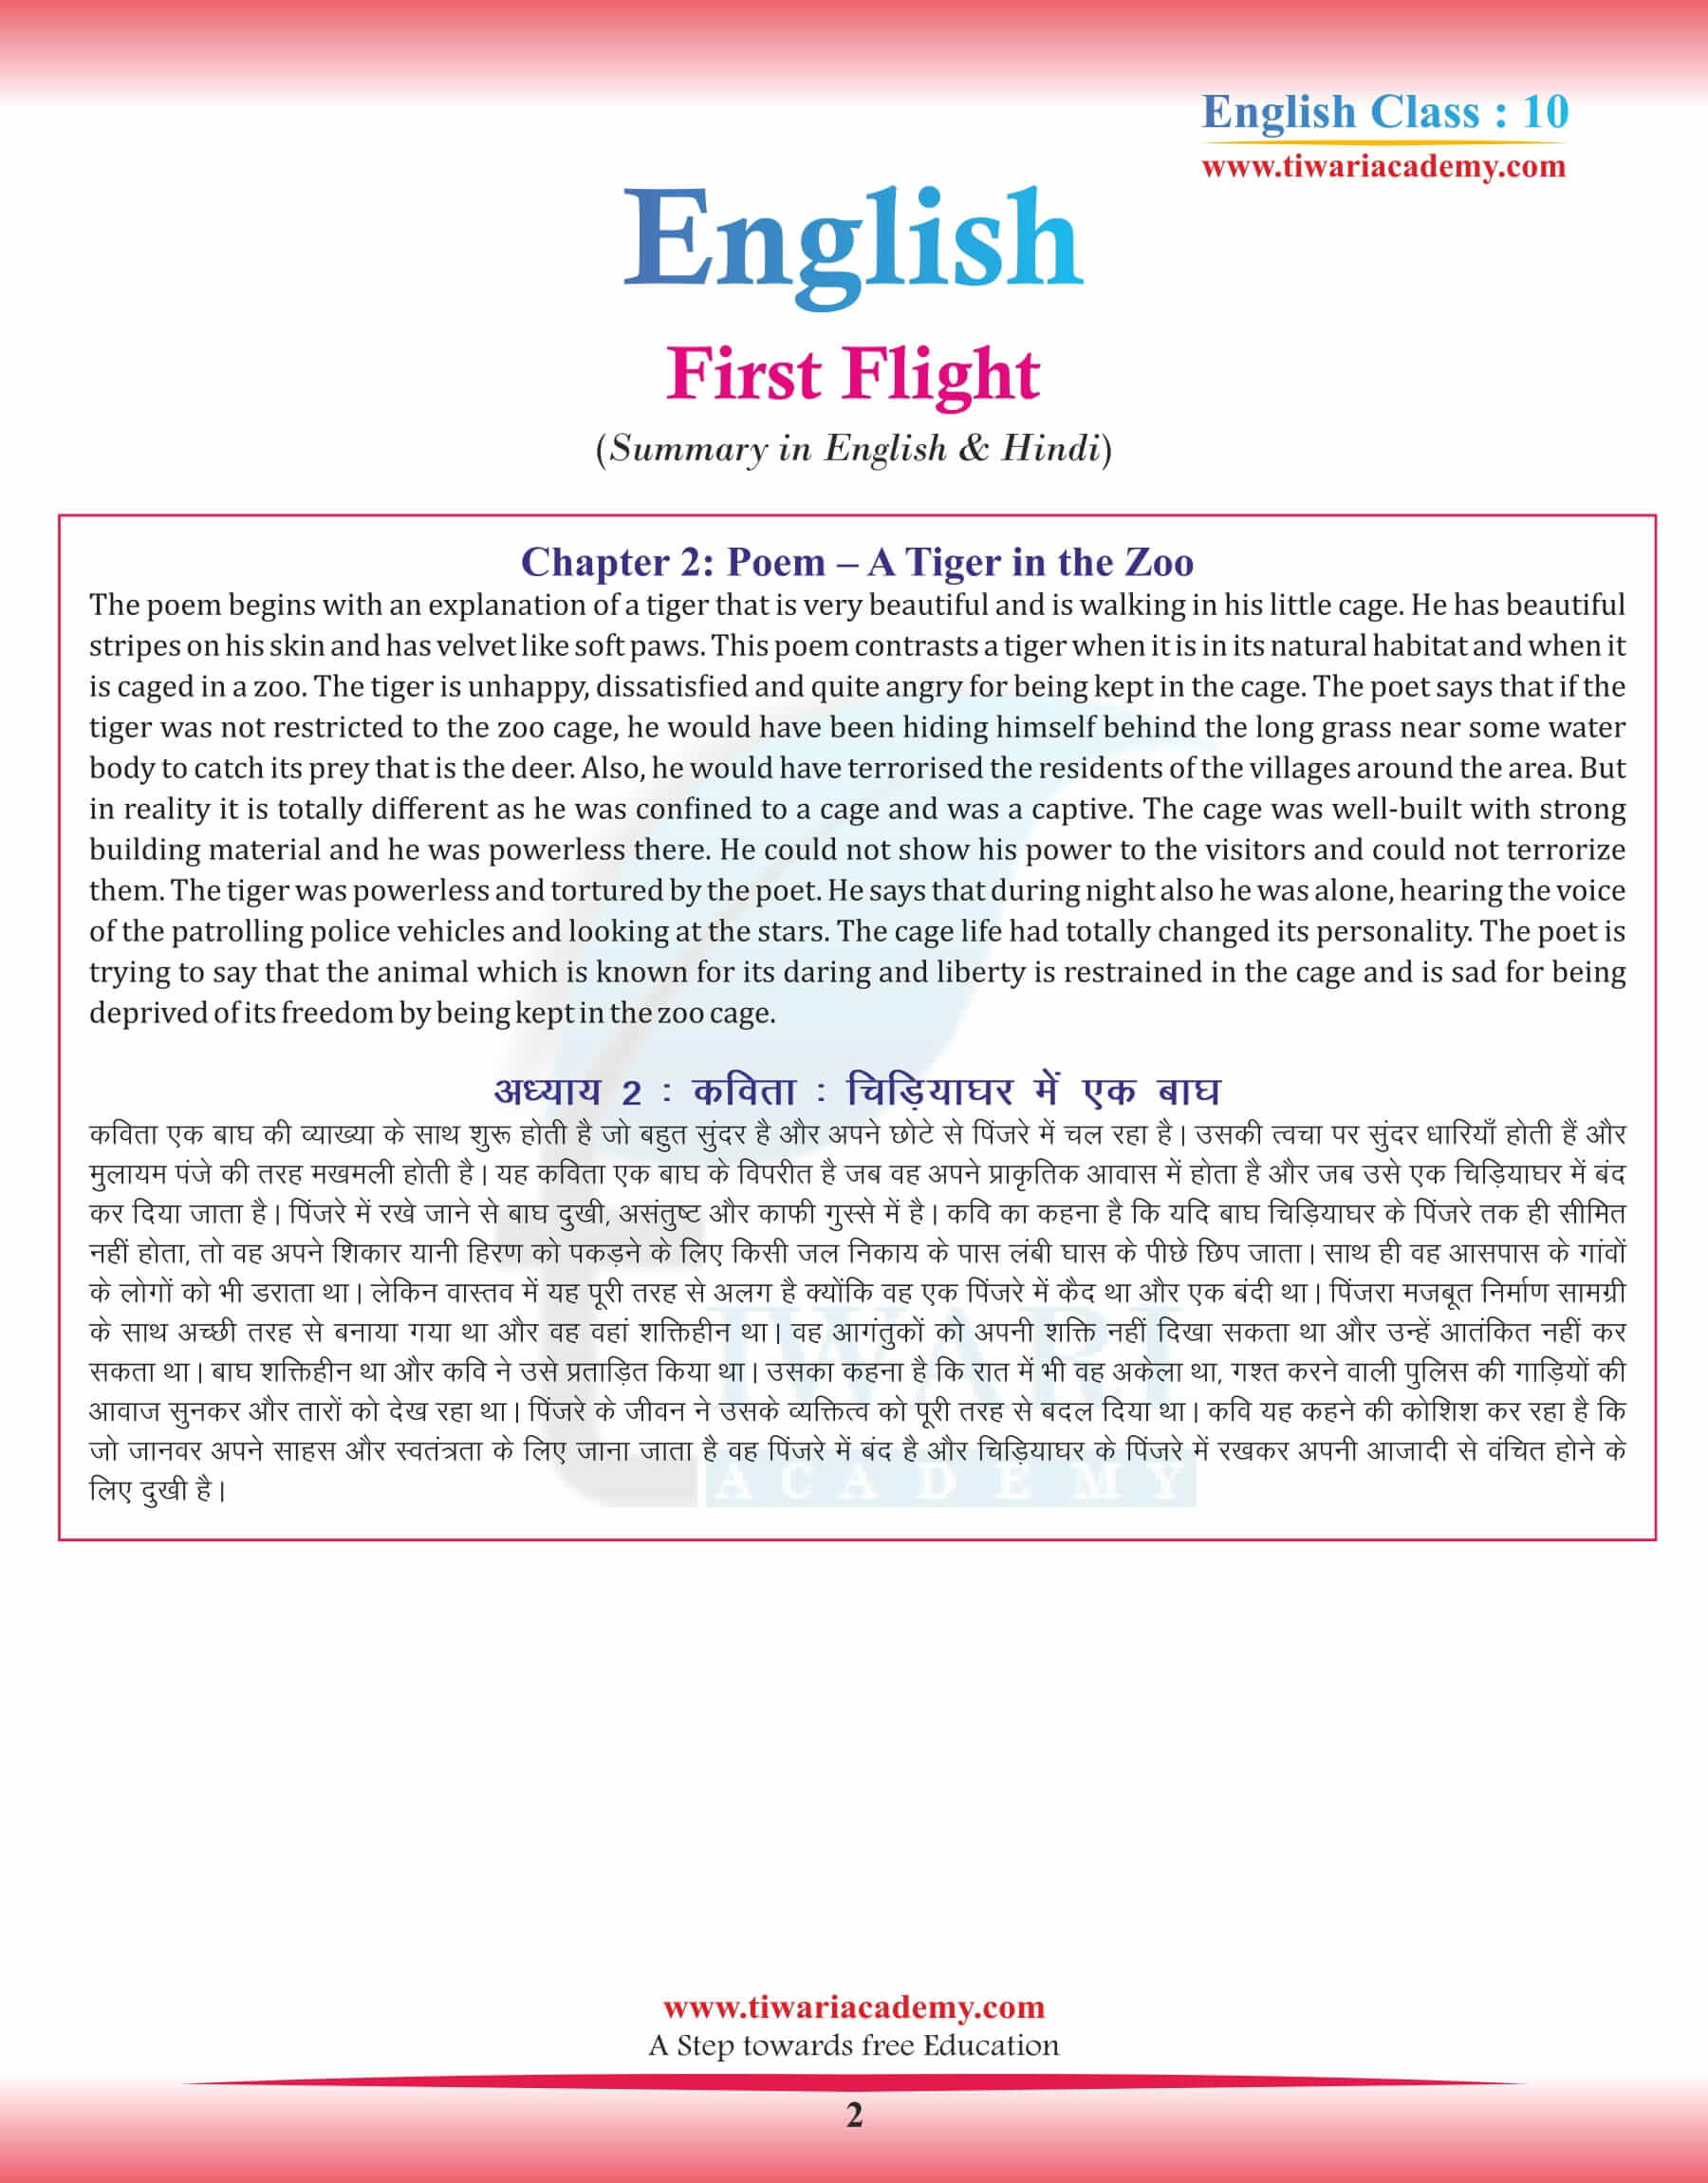 Class 10 English Chapter 2 Poem Summary in Hindi